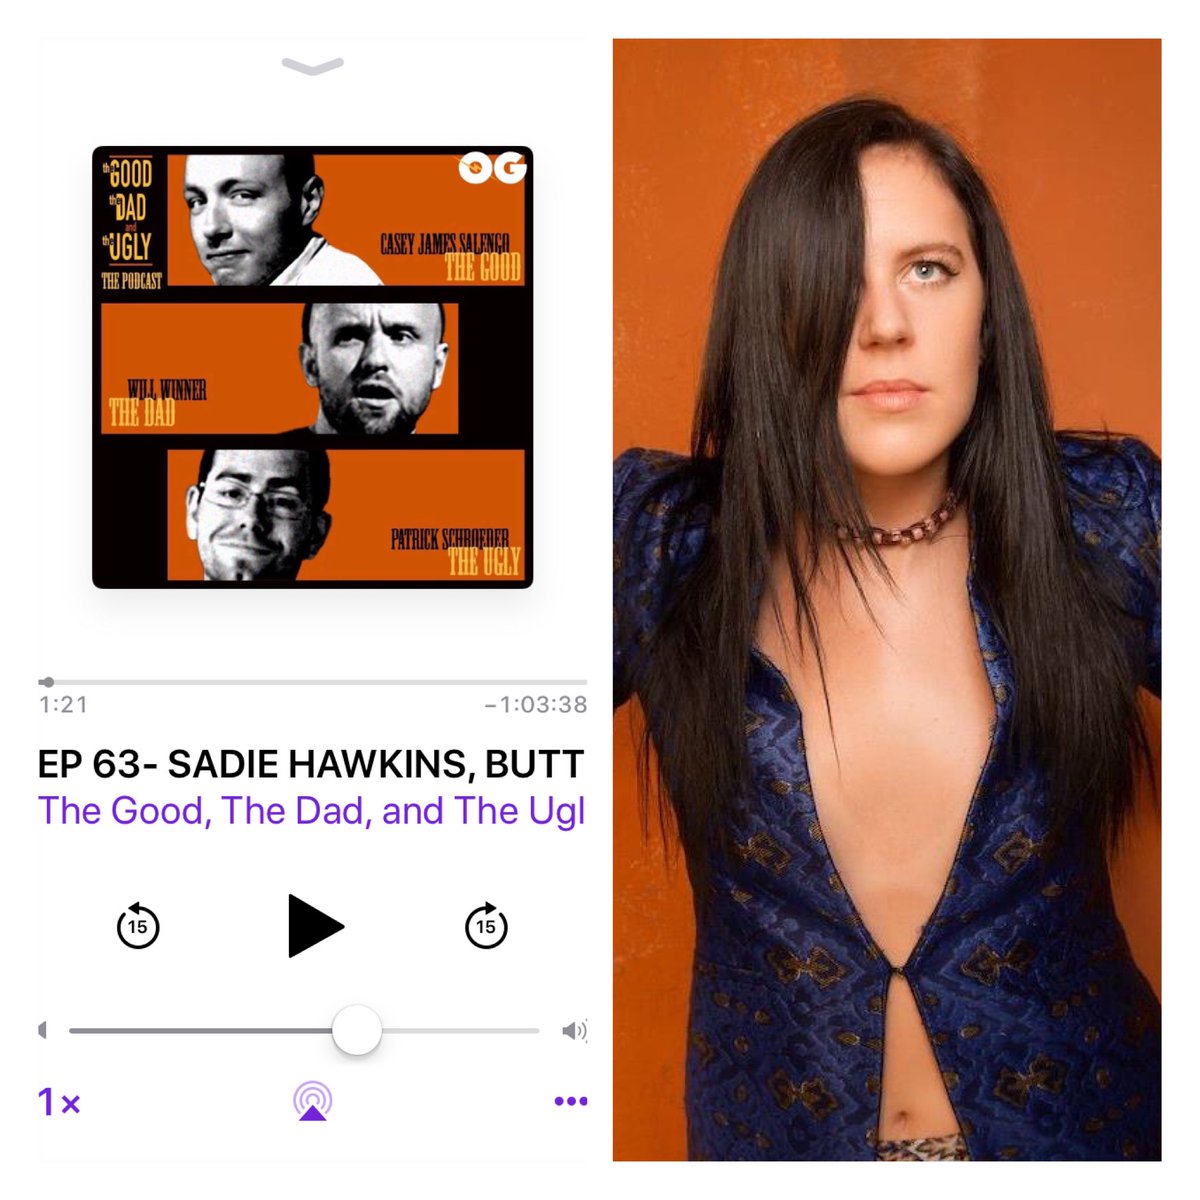 Episode 63 is a hot one as @AndreaComedy came on to defend her butt pics and learn the true story behind the Sadie Hawkins dance! She said we could use her butt selfie to promote the show but we chickened out! 

Full ep—> apple.co/2iMJ9V4